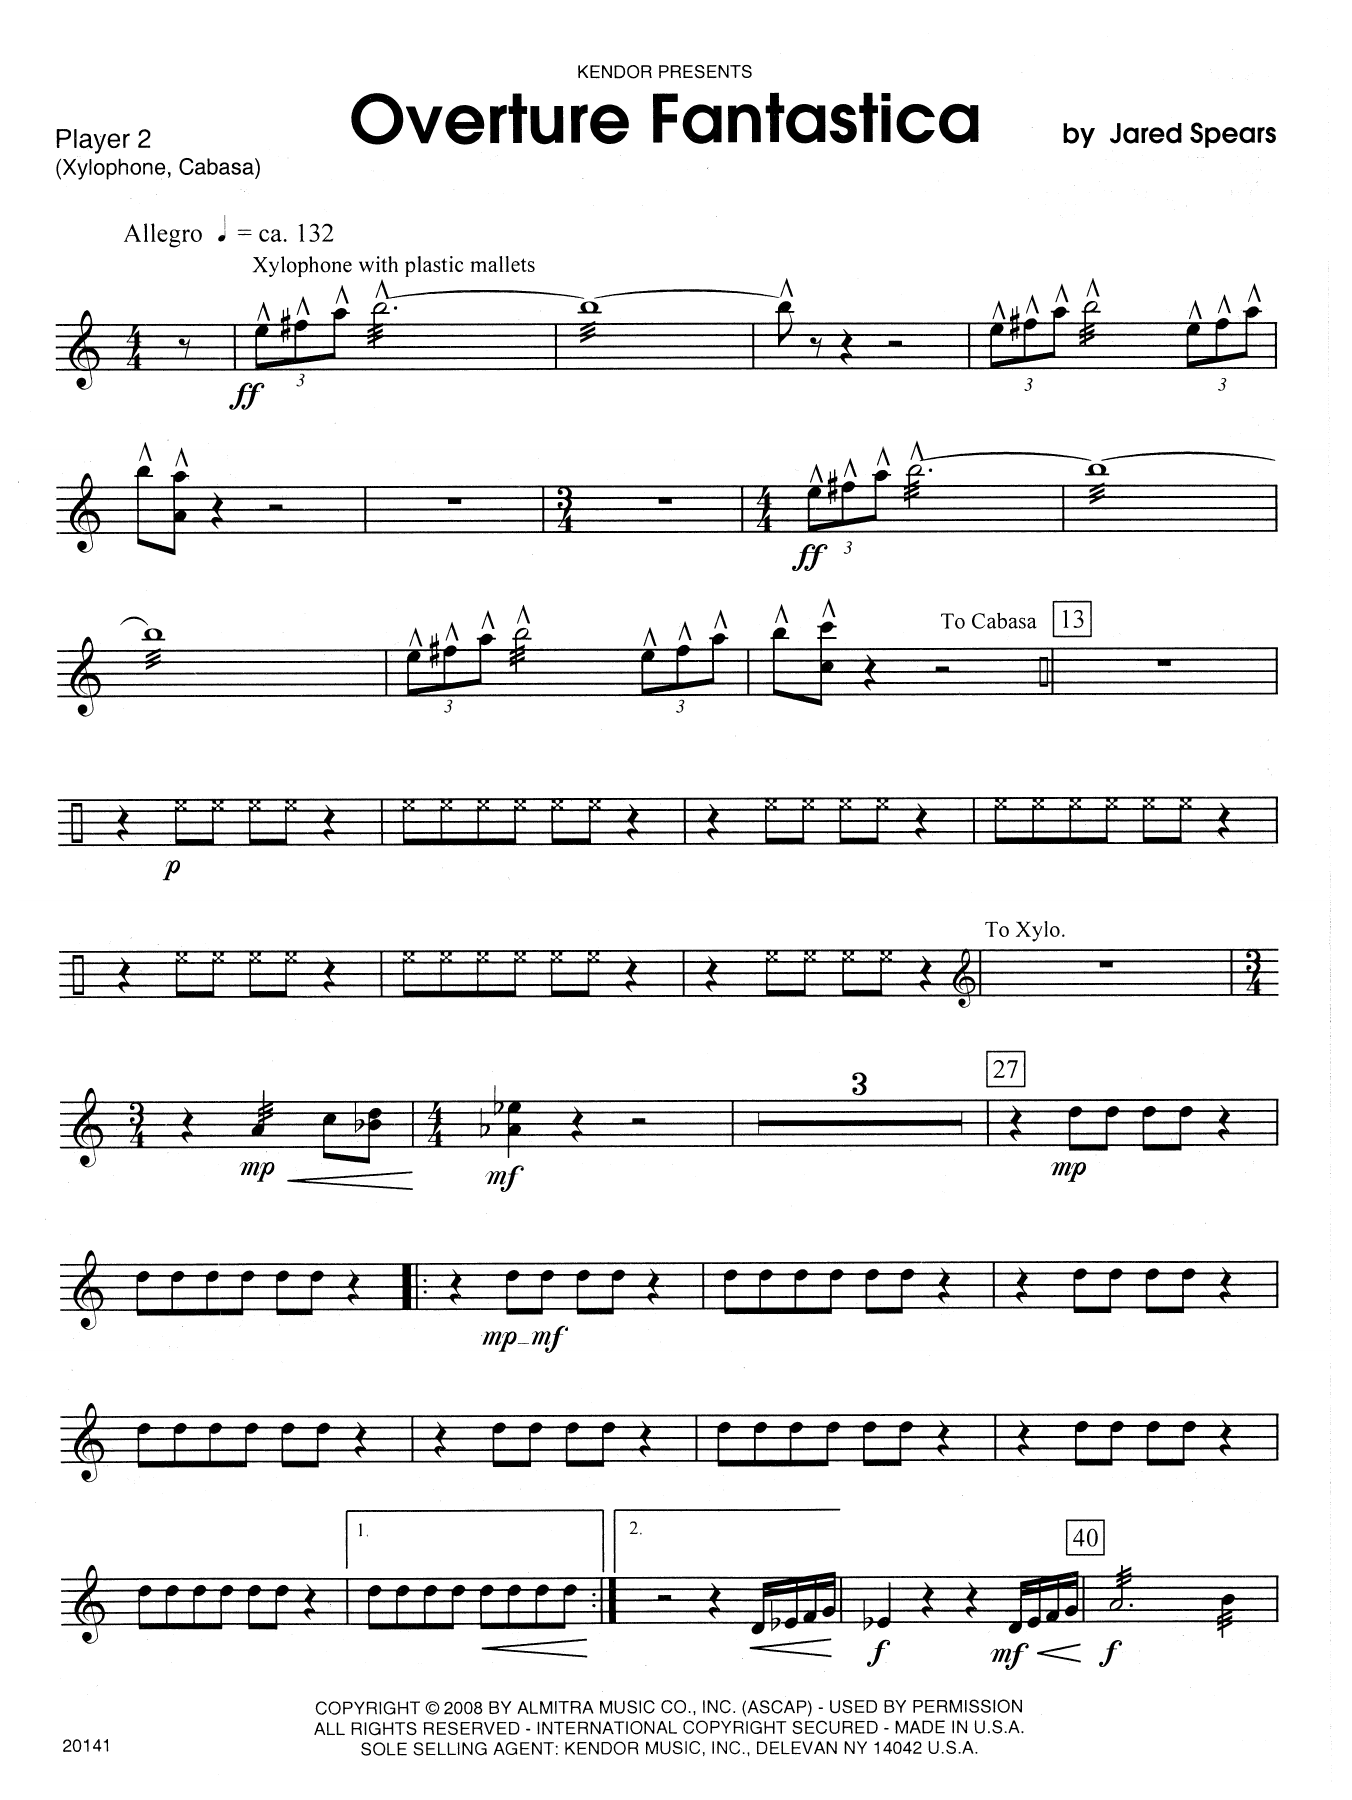 Download Jared Spears Overture Fantastica - Percussion 2 Sheet Music